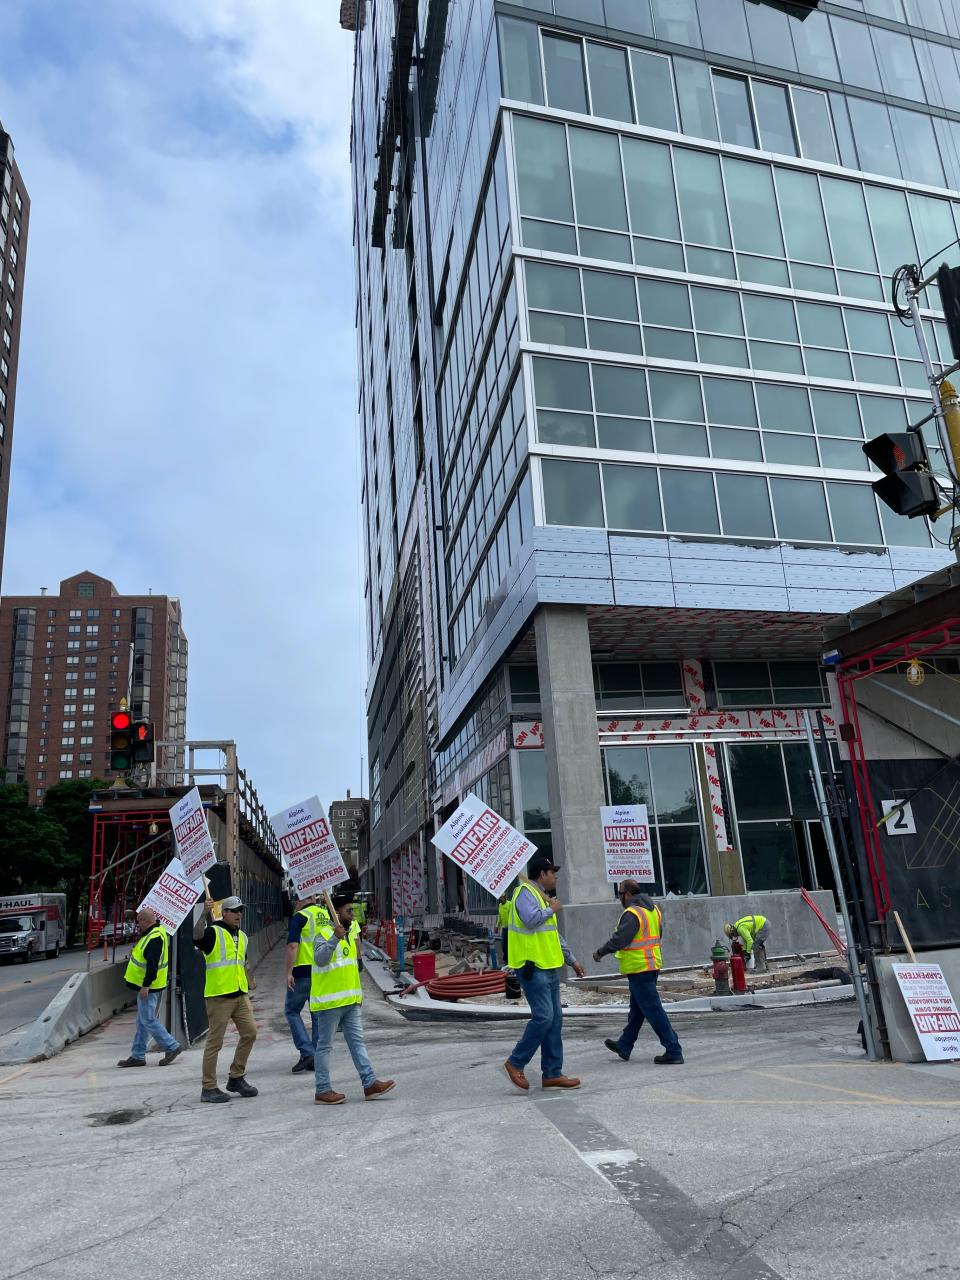 Workers represented by North Central States Regional Council of Carpenters picket Tuesday outside the Ascent apartment tower under construction at the corner of E. Kilbourn Avenue and N. Van Buren Street. They accuse Alpine Installation of engaging in unfair wage practices.